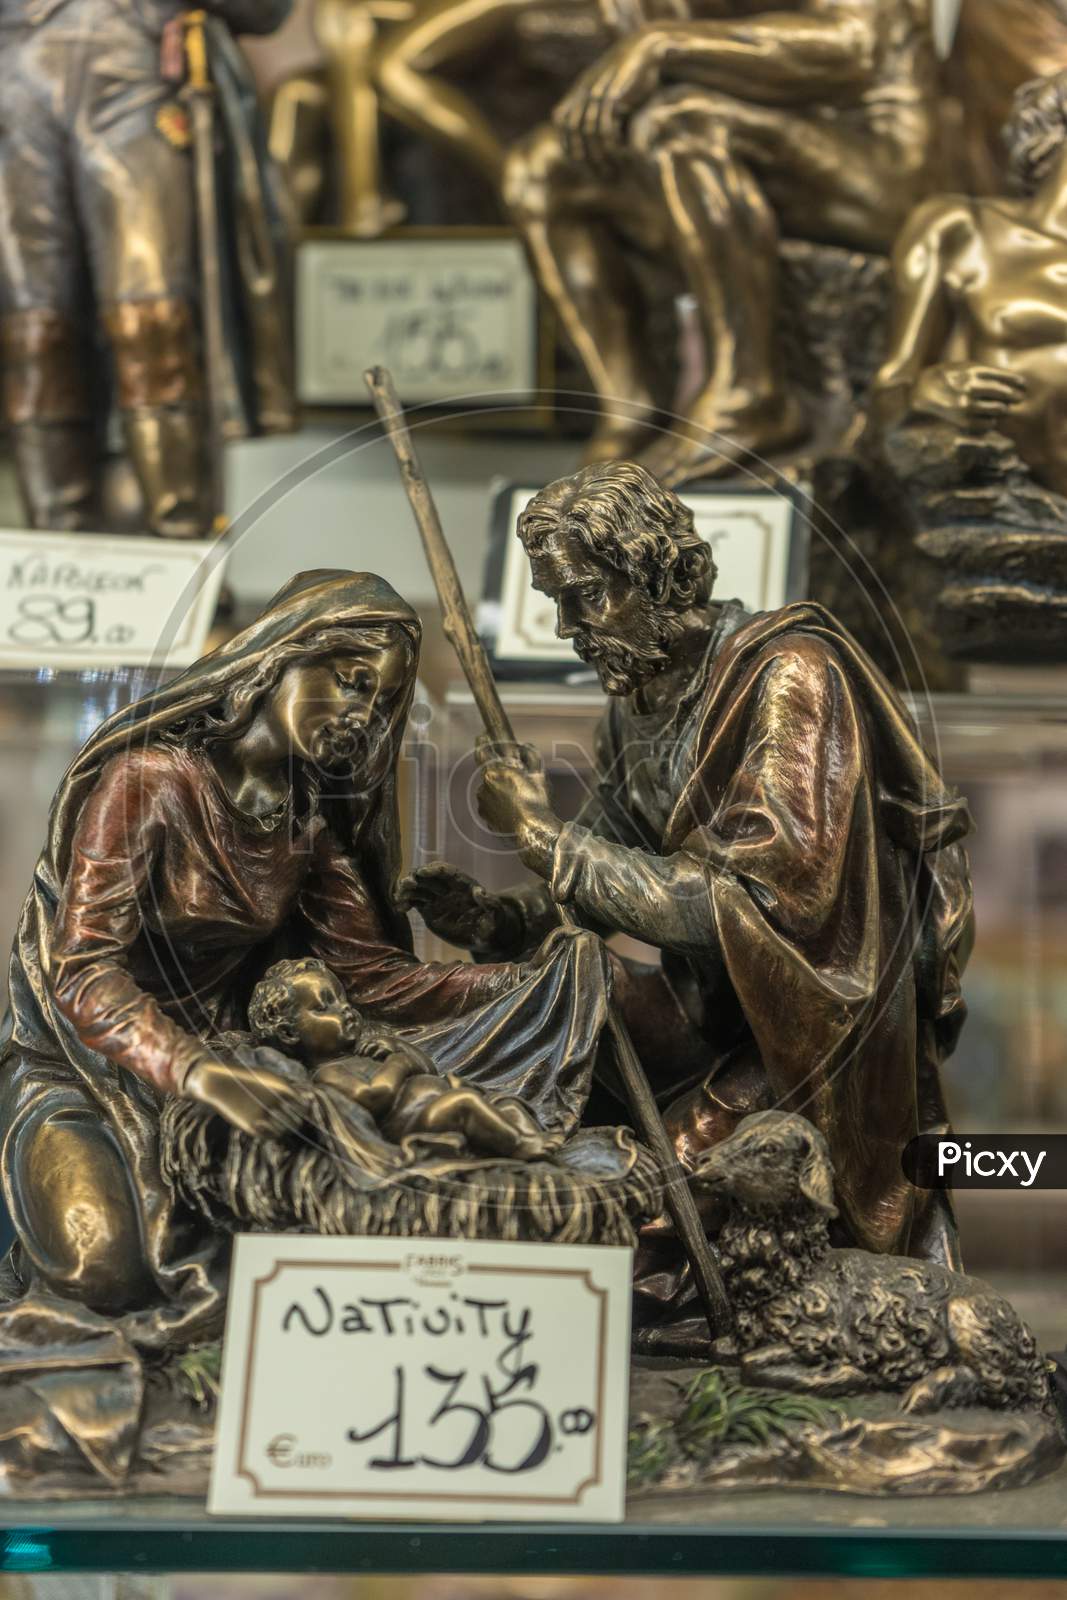 Venice, Italy - 30 June 2018: Nativity Artifacts On Display In A Shop In Venice, Italy